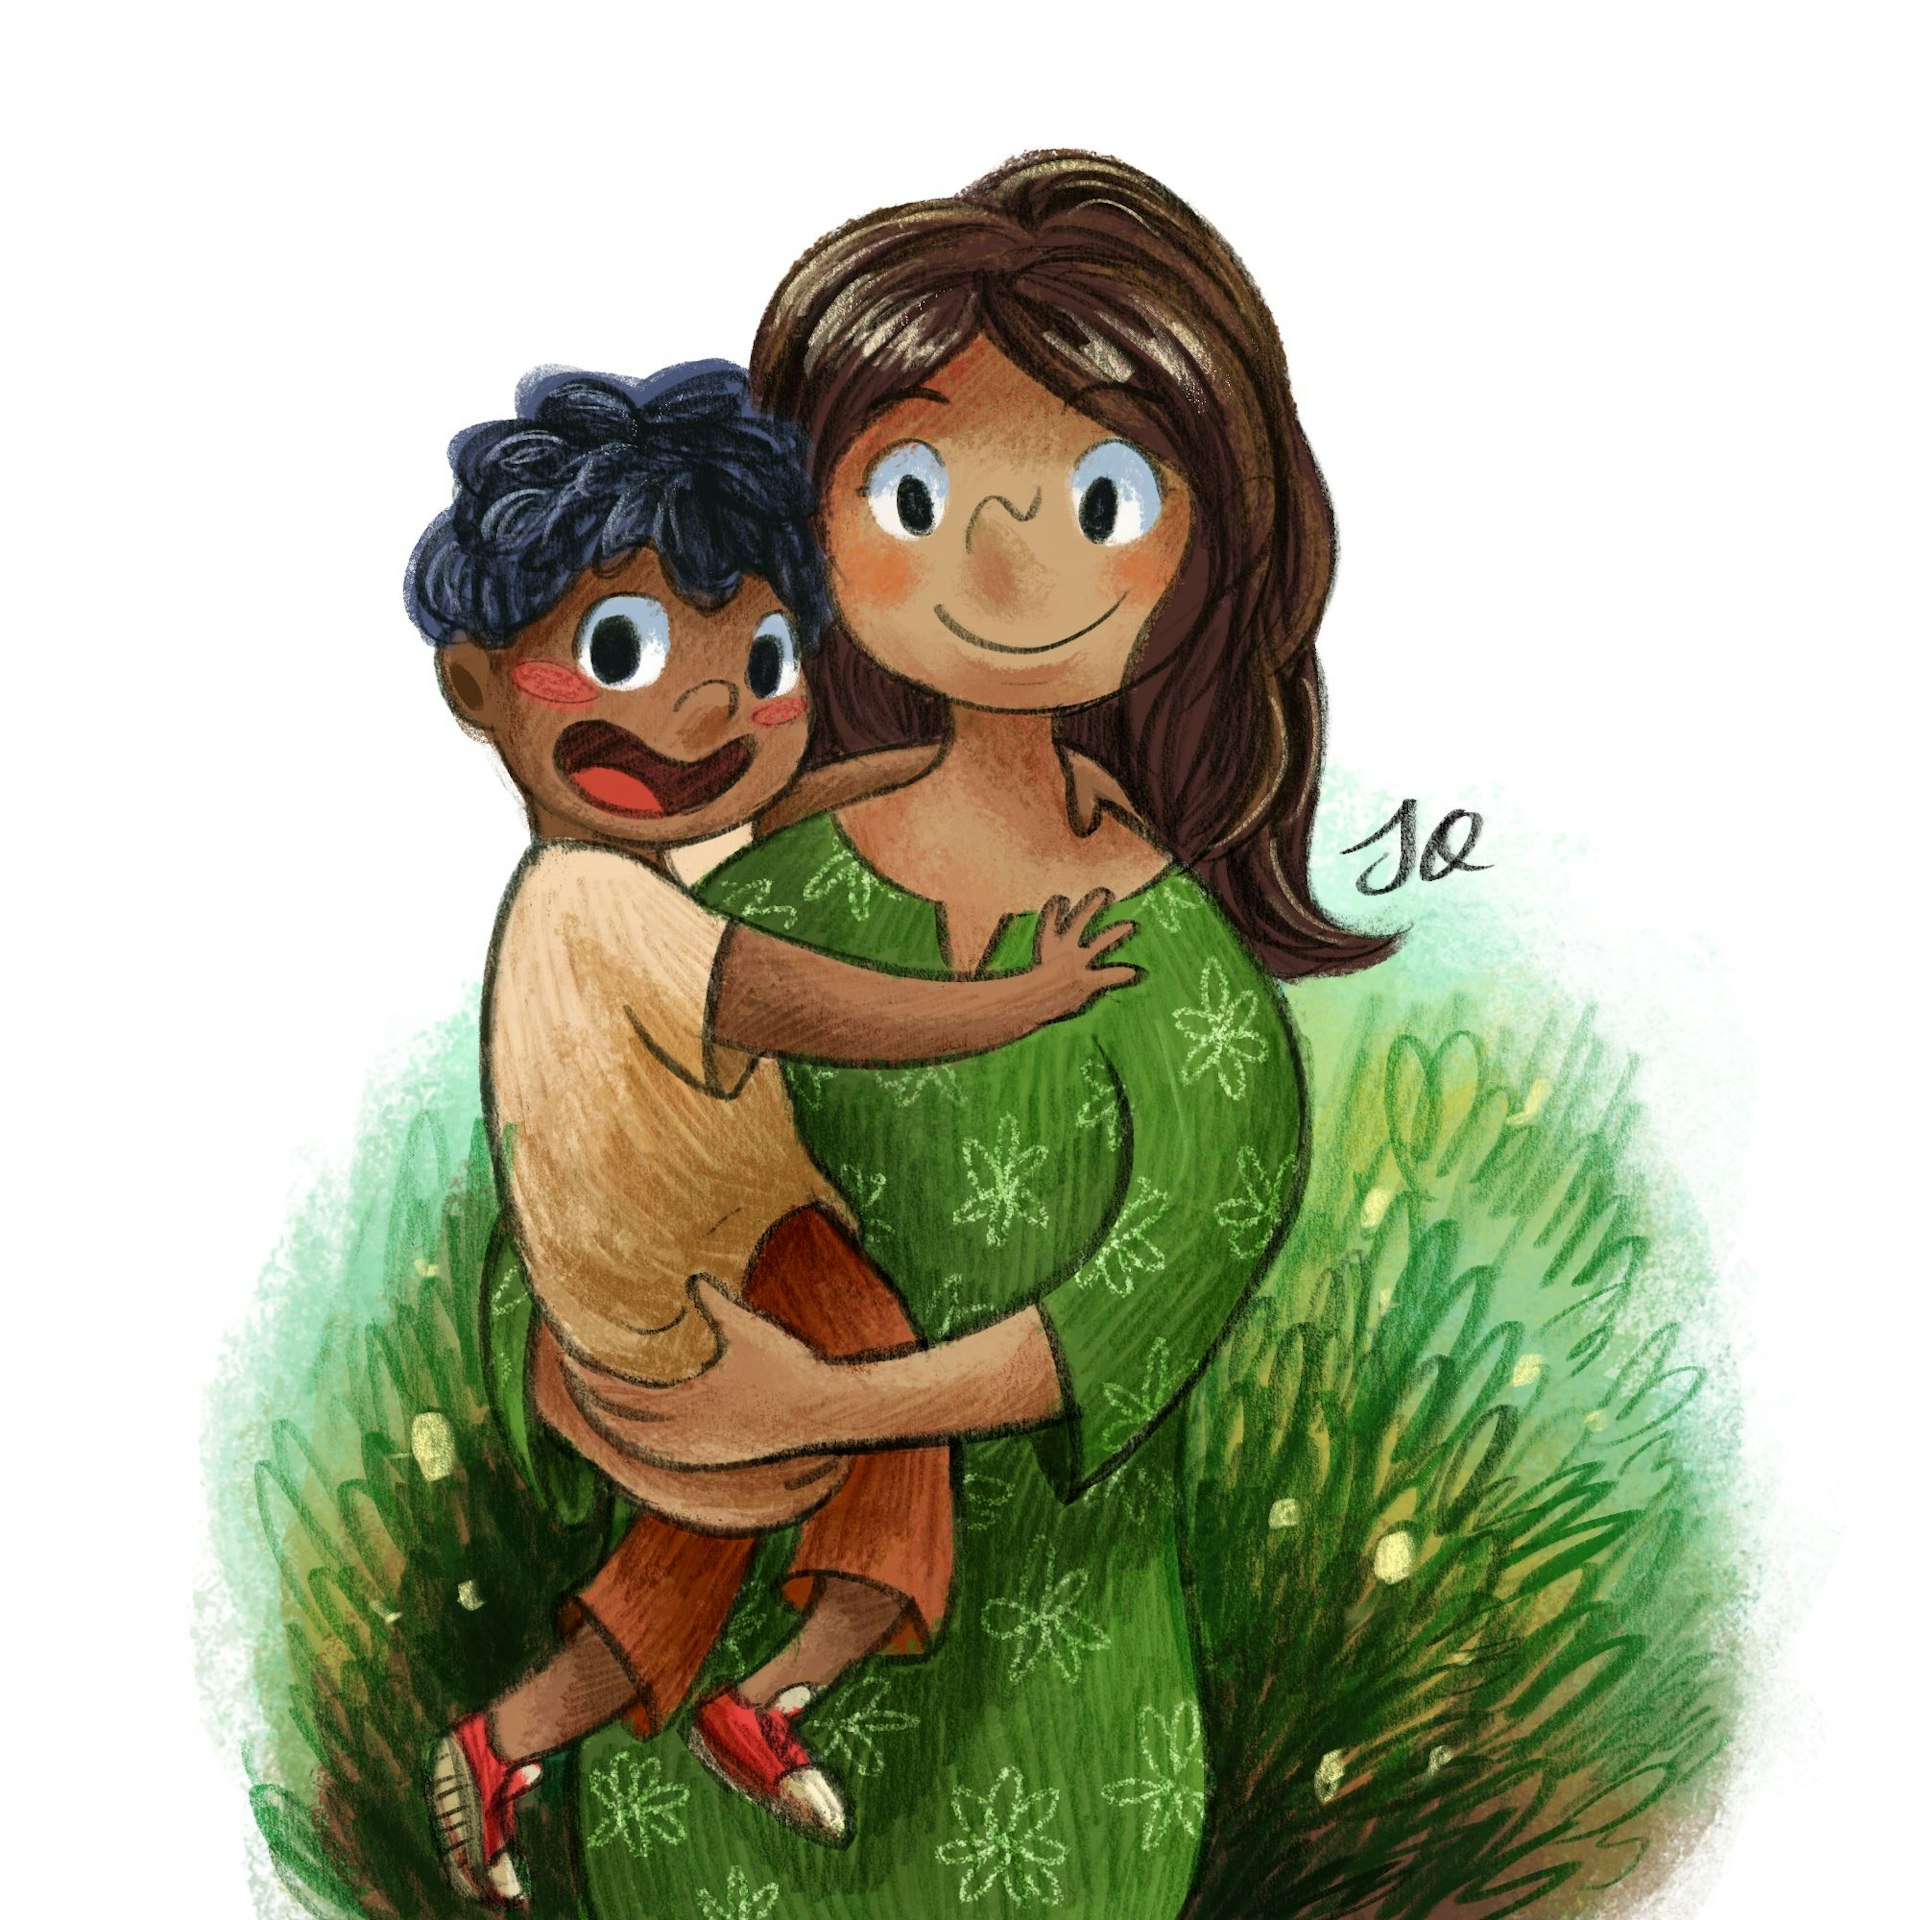 Character design of Baby and Mummy